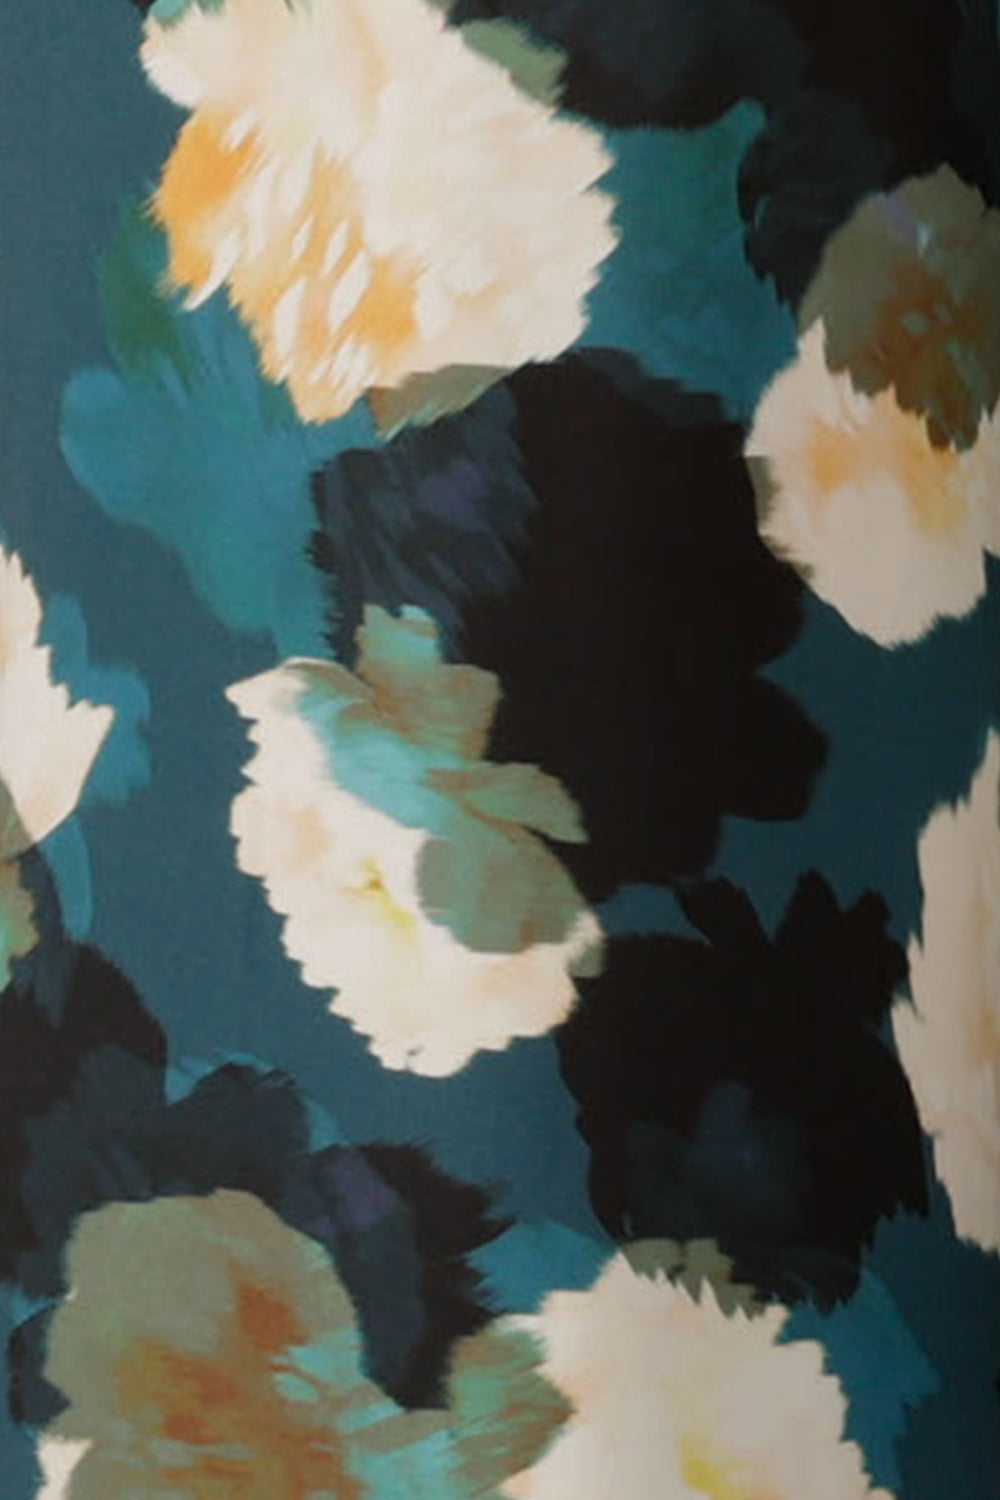 swatch of australian and new zealand women's clothing brand, L&F's sustainable Tencel fabric in a navy, teal and white digital print, and used in a range of women's work wear tailored pants and jackets.